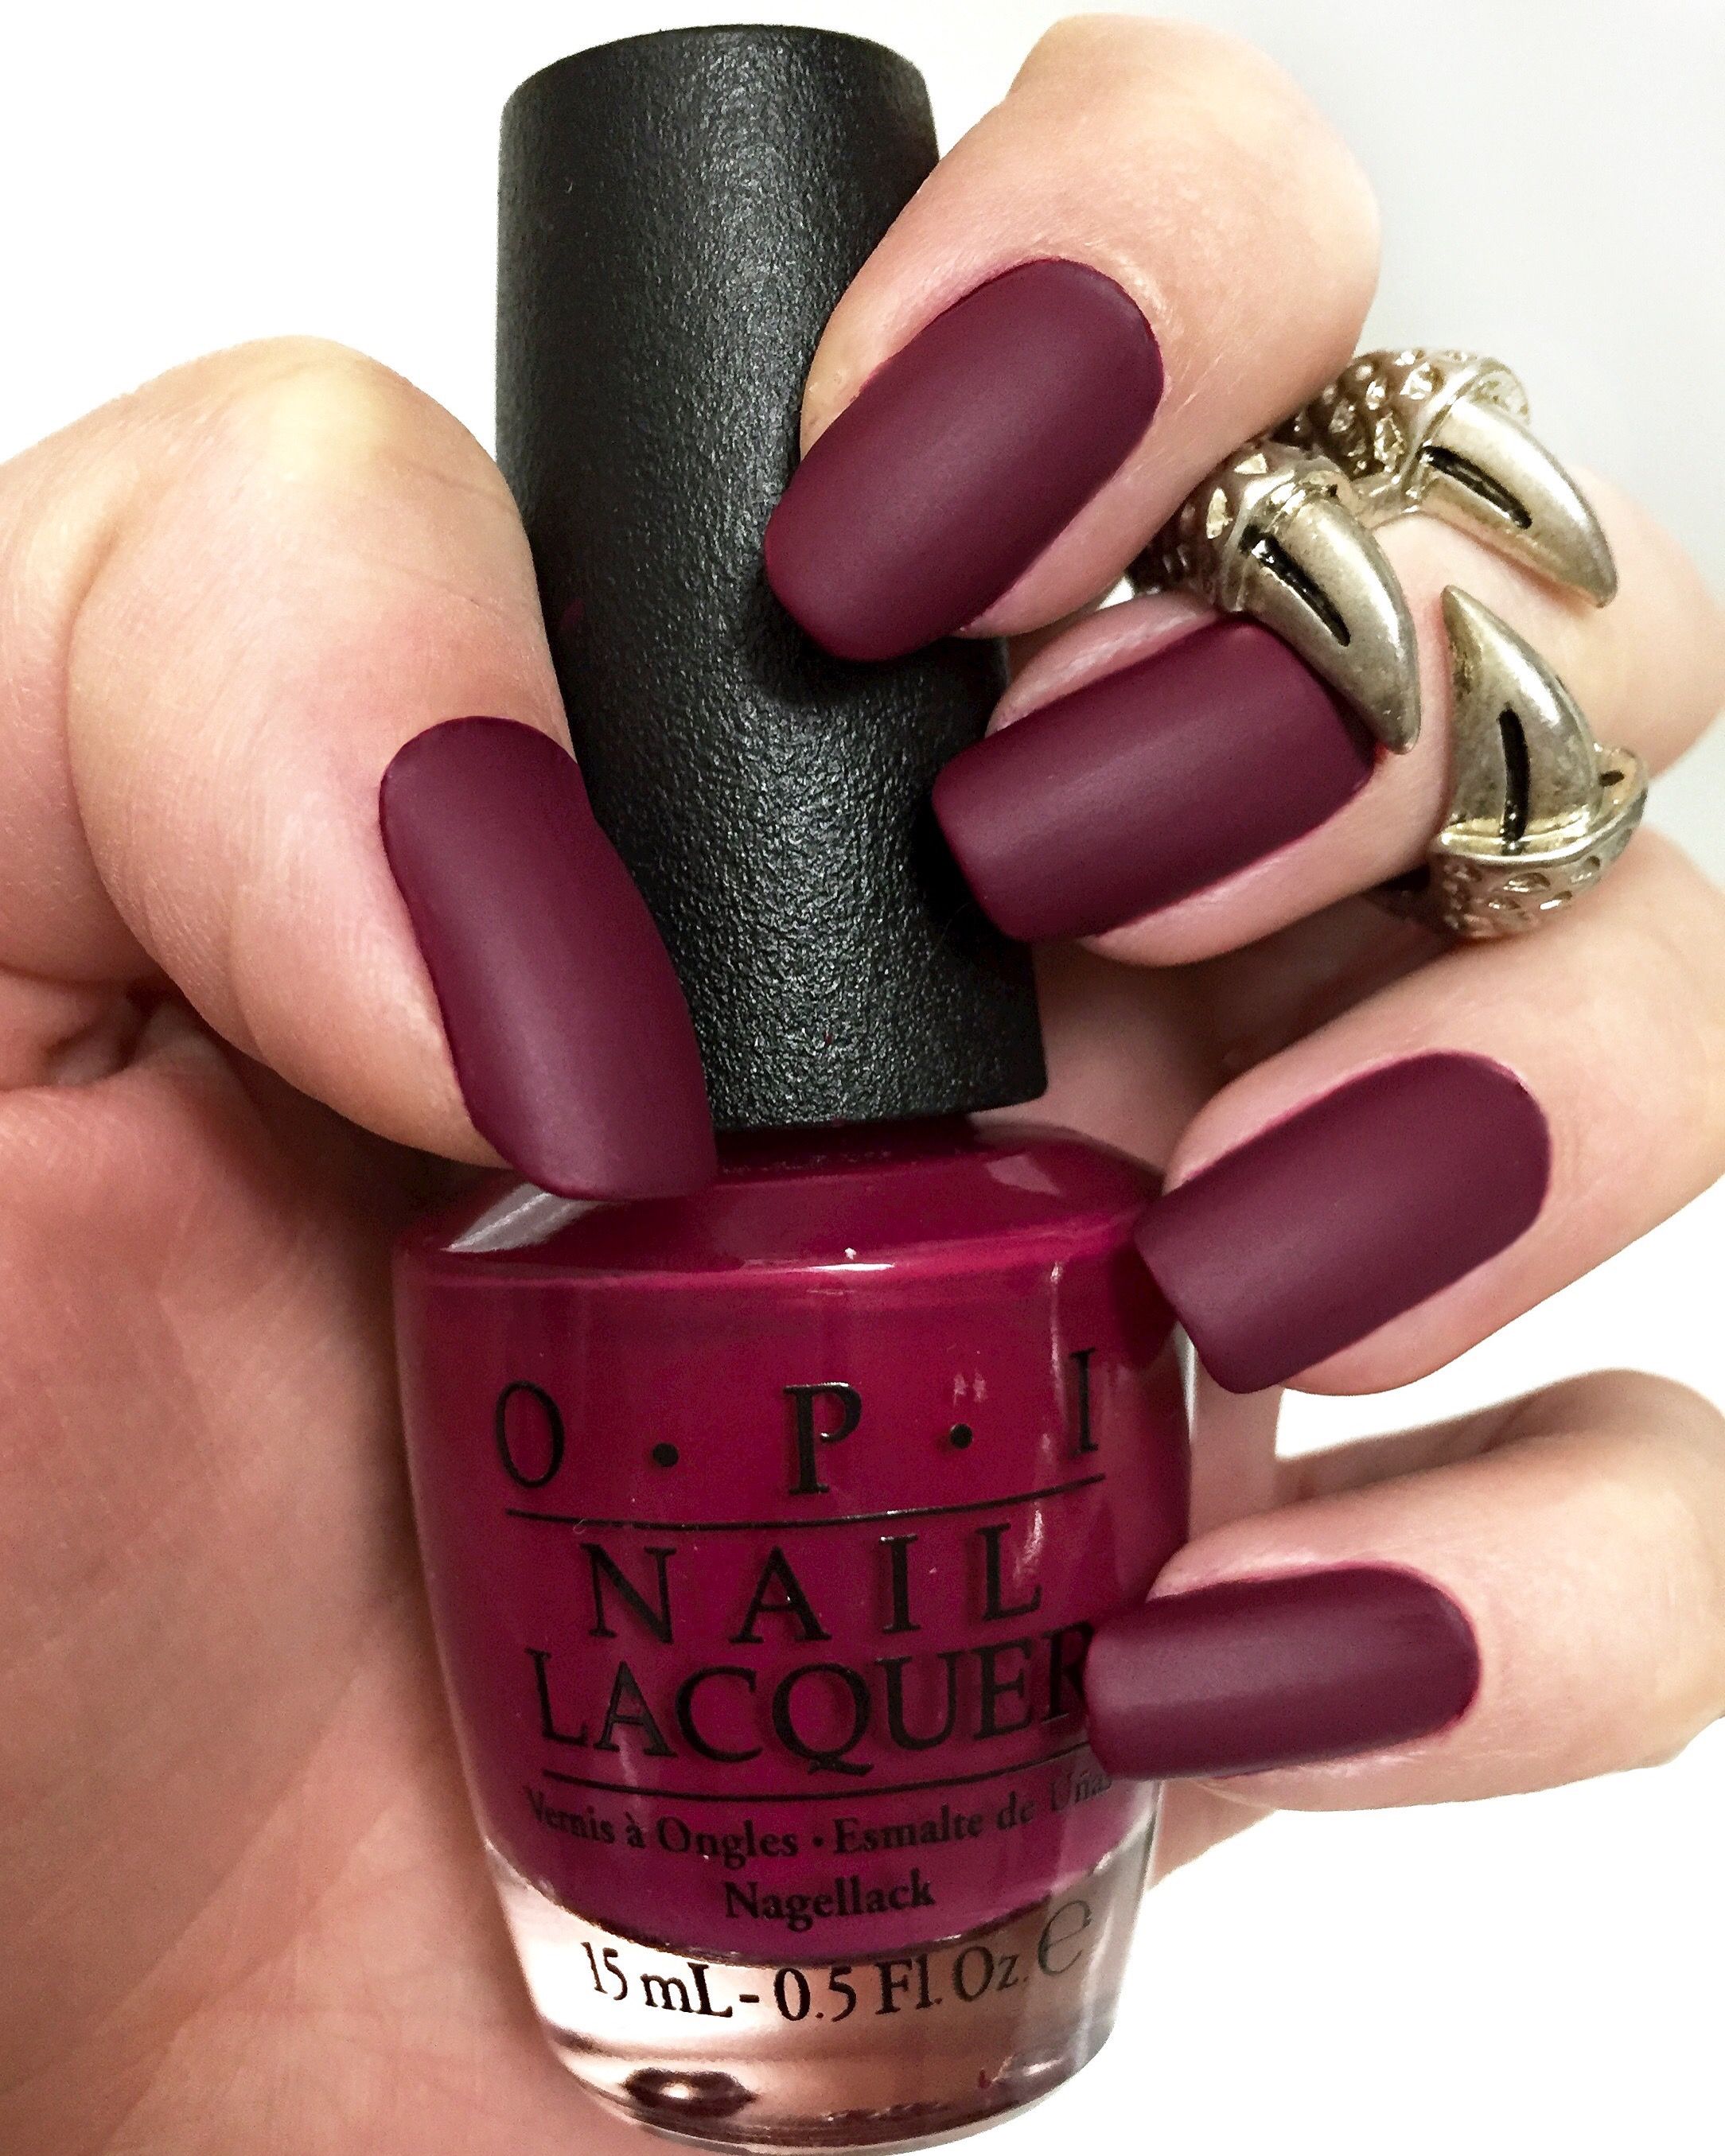 Just finished painting my nails! A gorgeous maroon matte <3 I ...